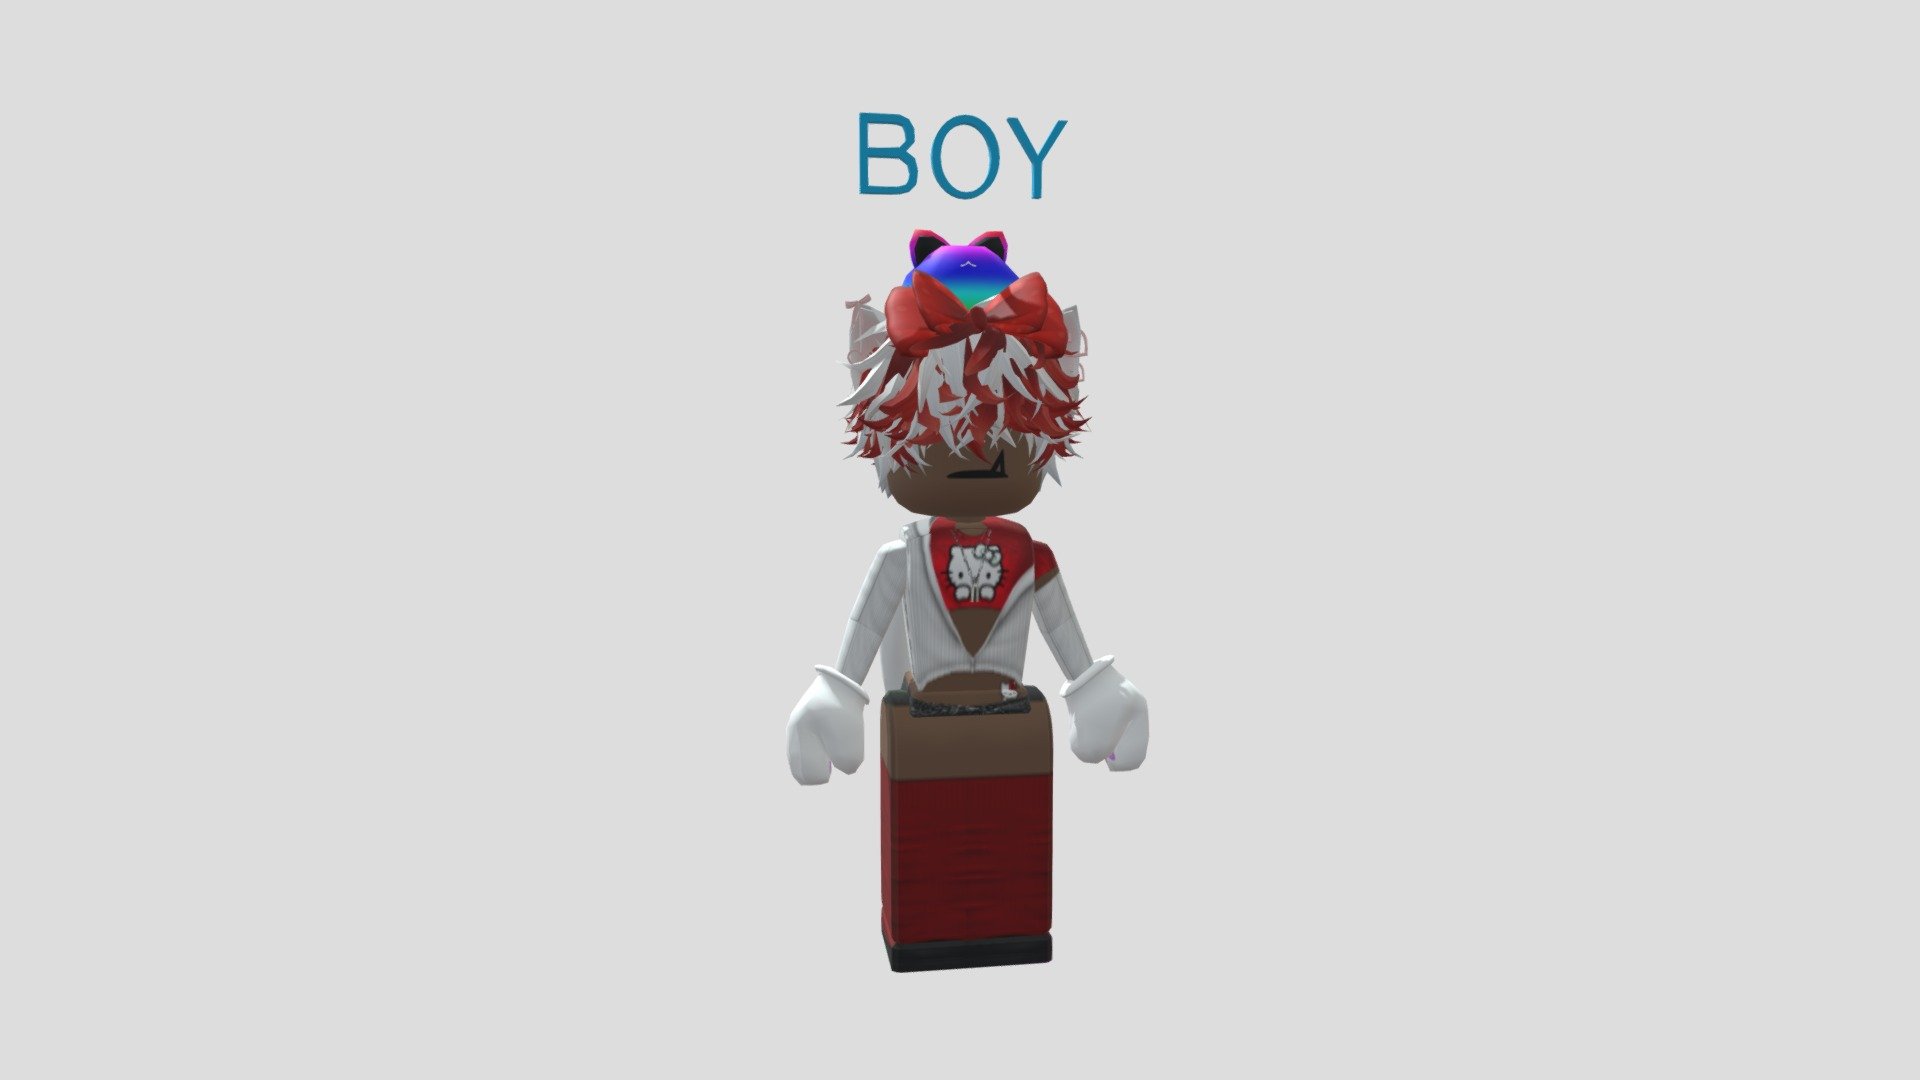 Roblox Hackers Changed Their Avatars INTO 3D MODELS!? 